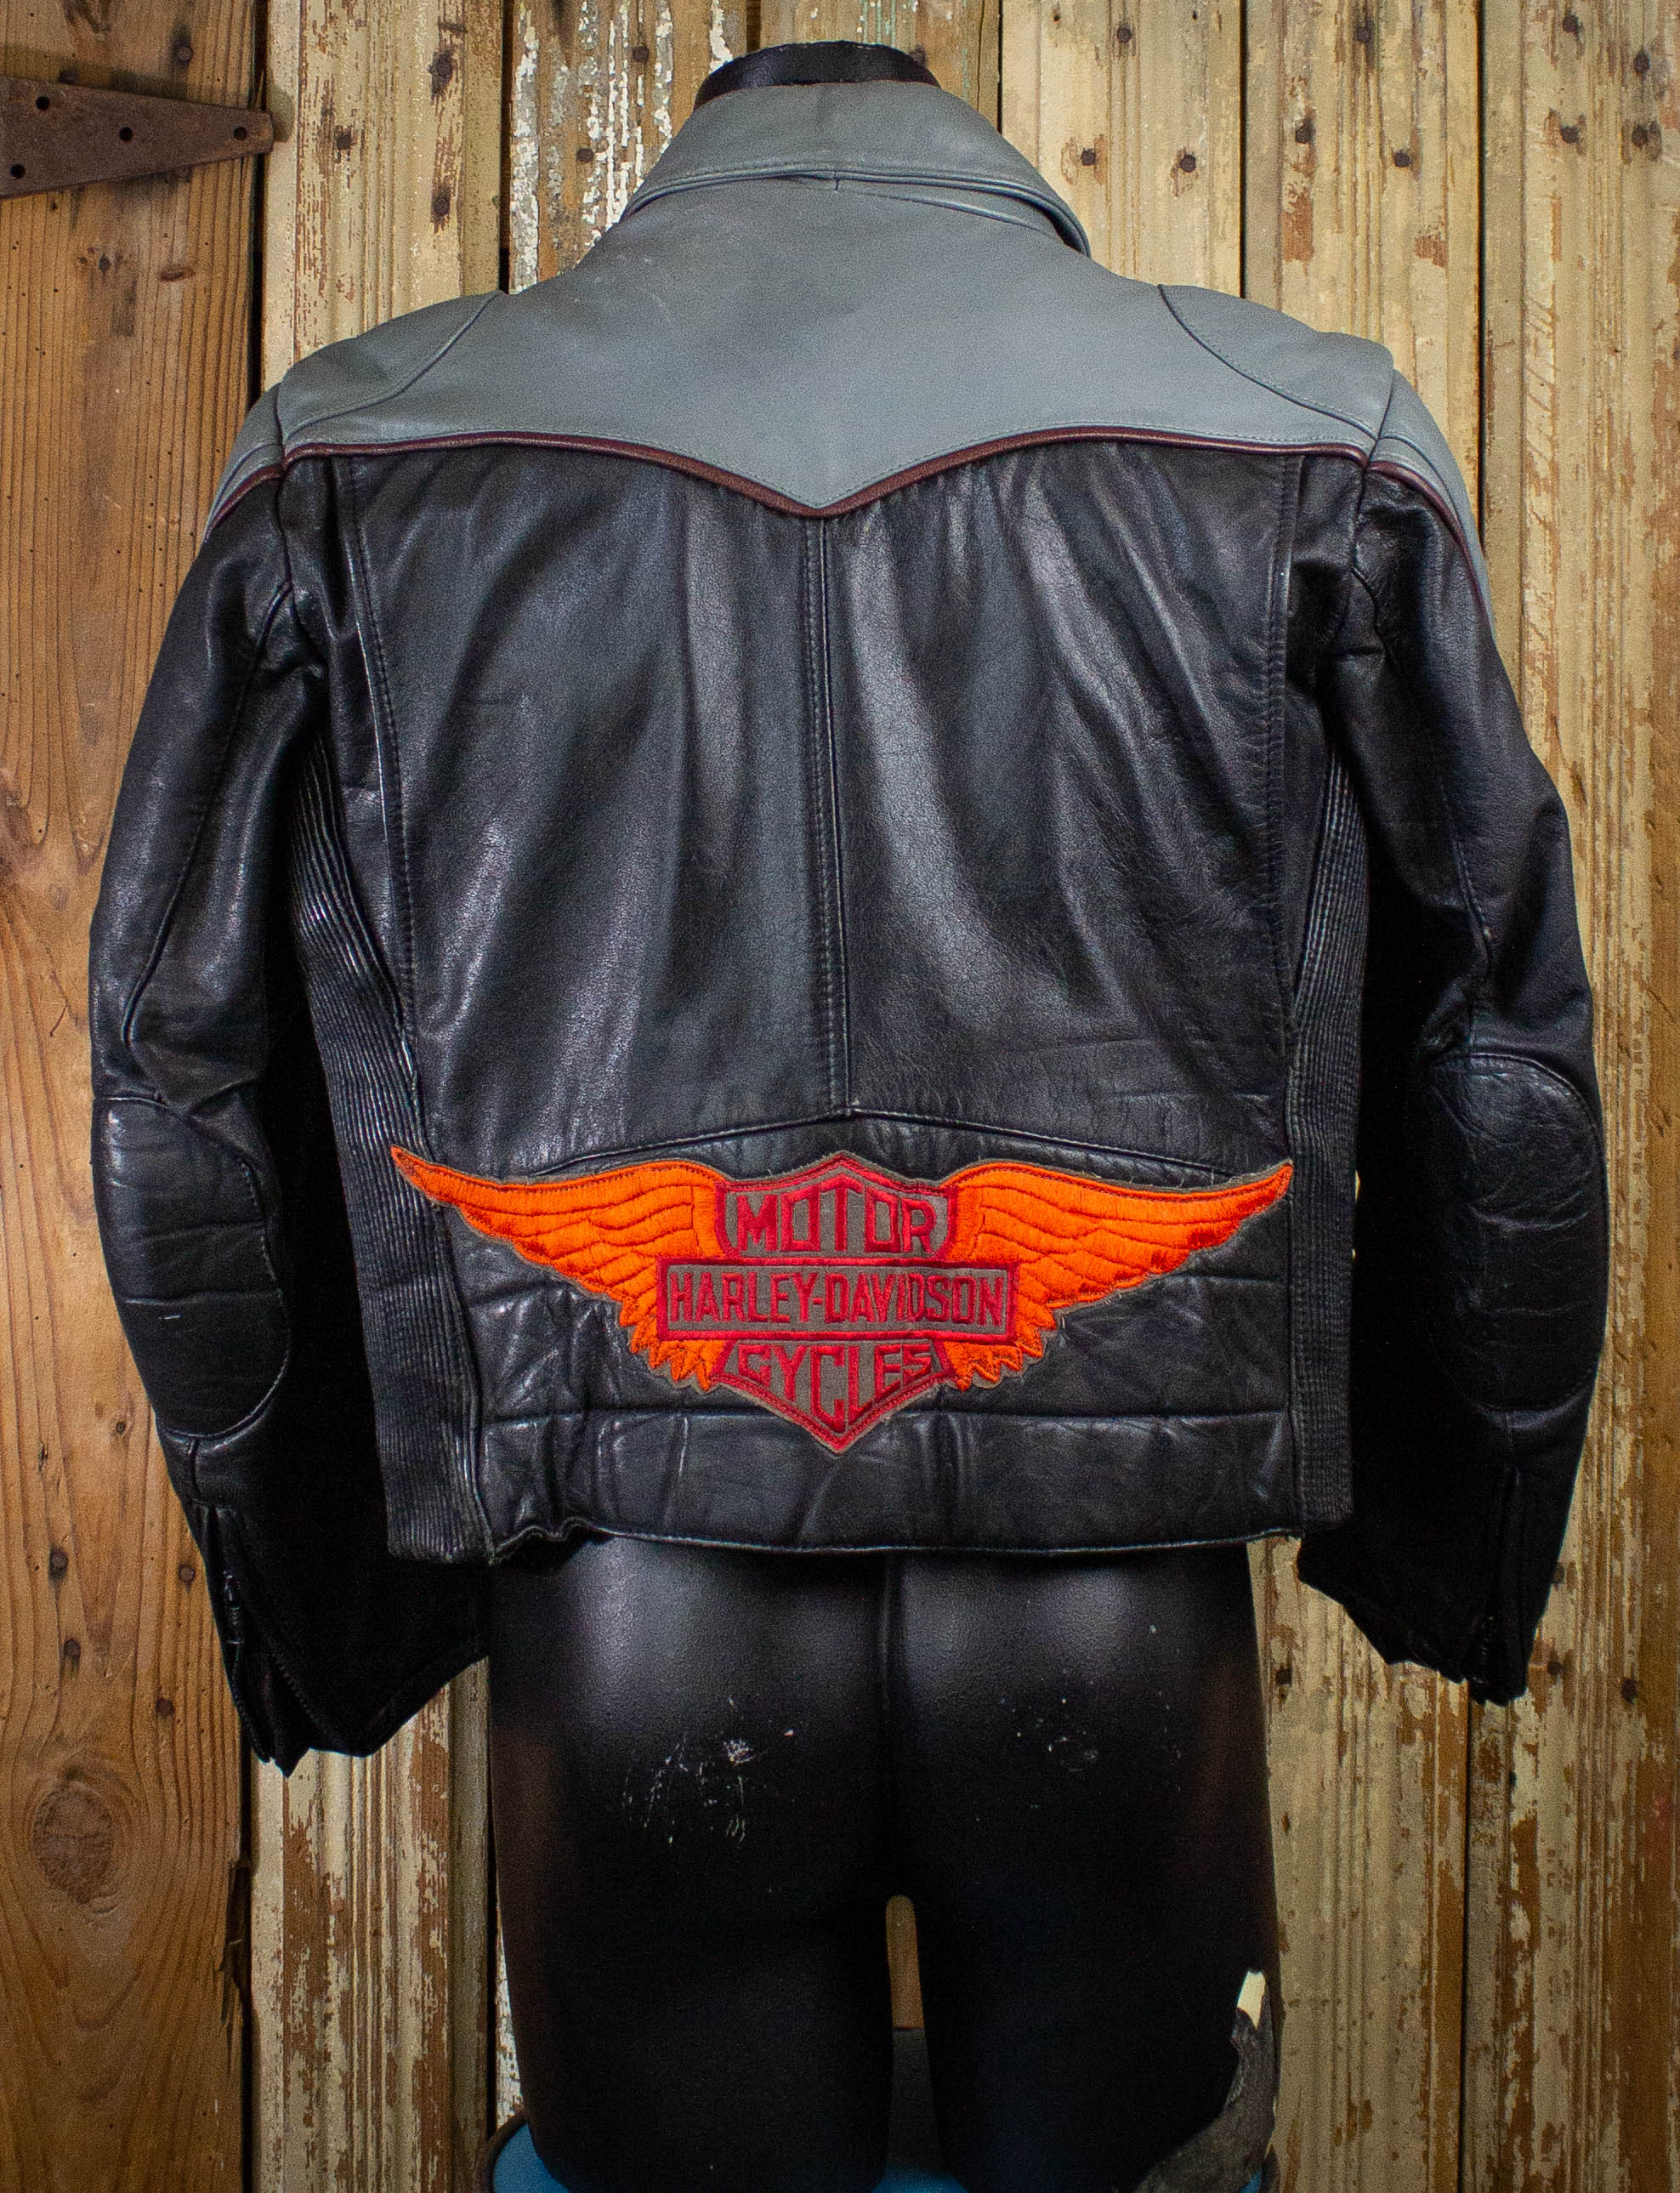 Harley davidson Leather jacket New Delhi - Buy Sell Used Products Online  India | SecondHandBazaar.in